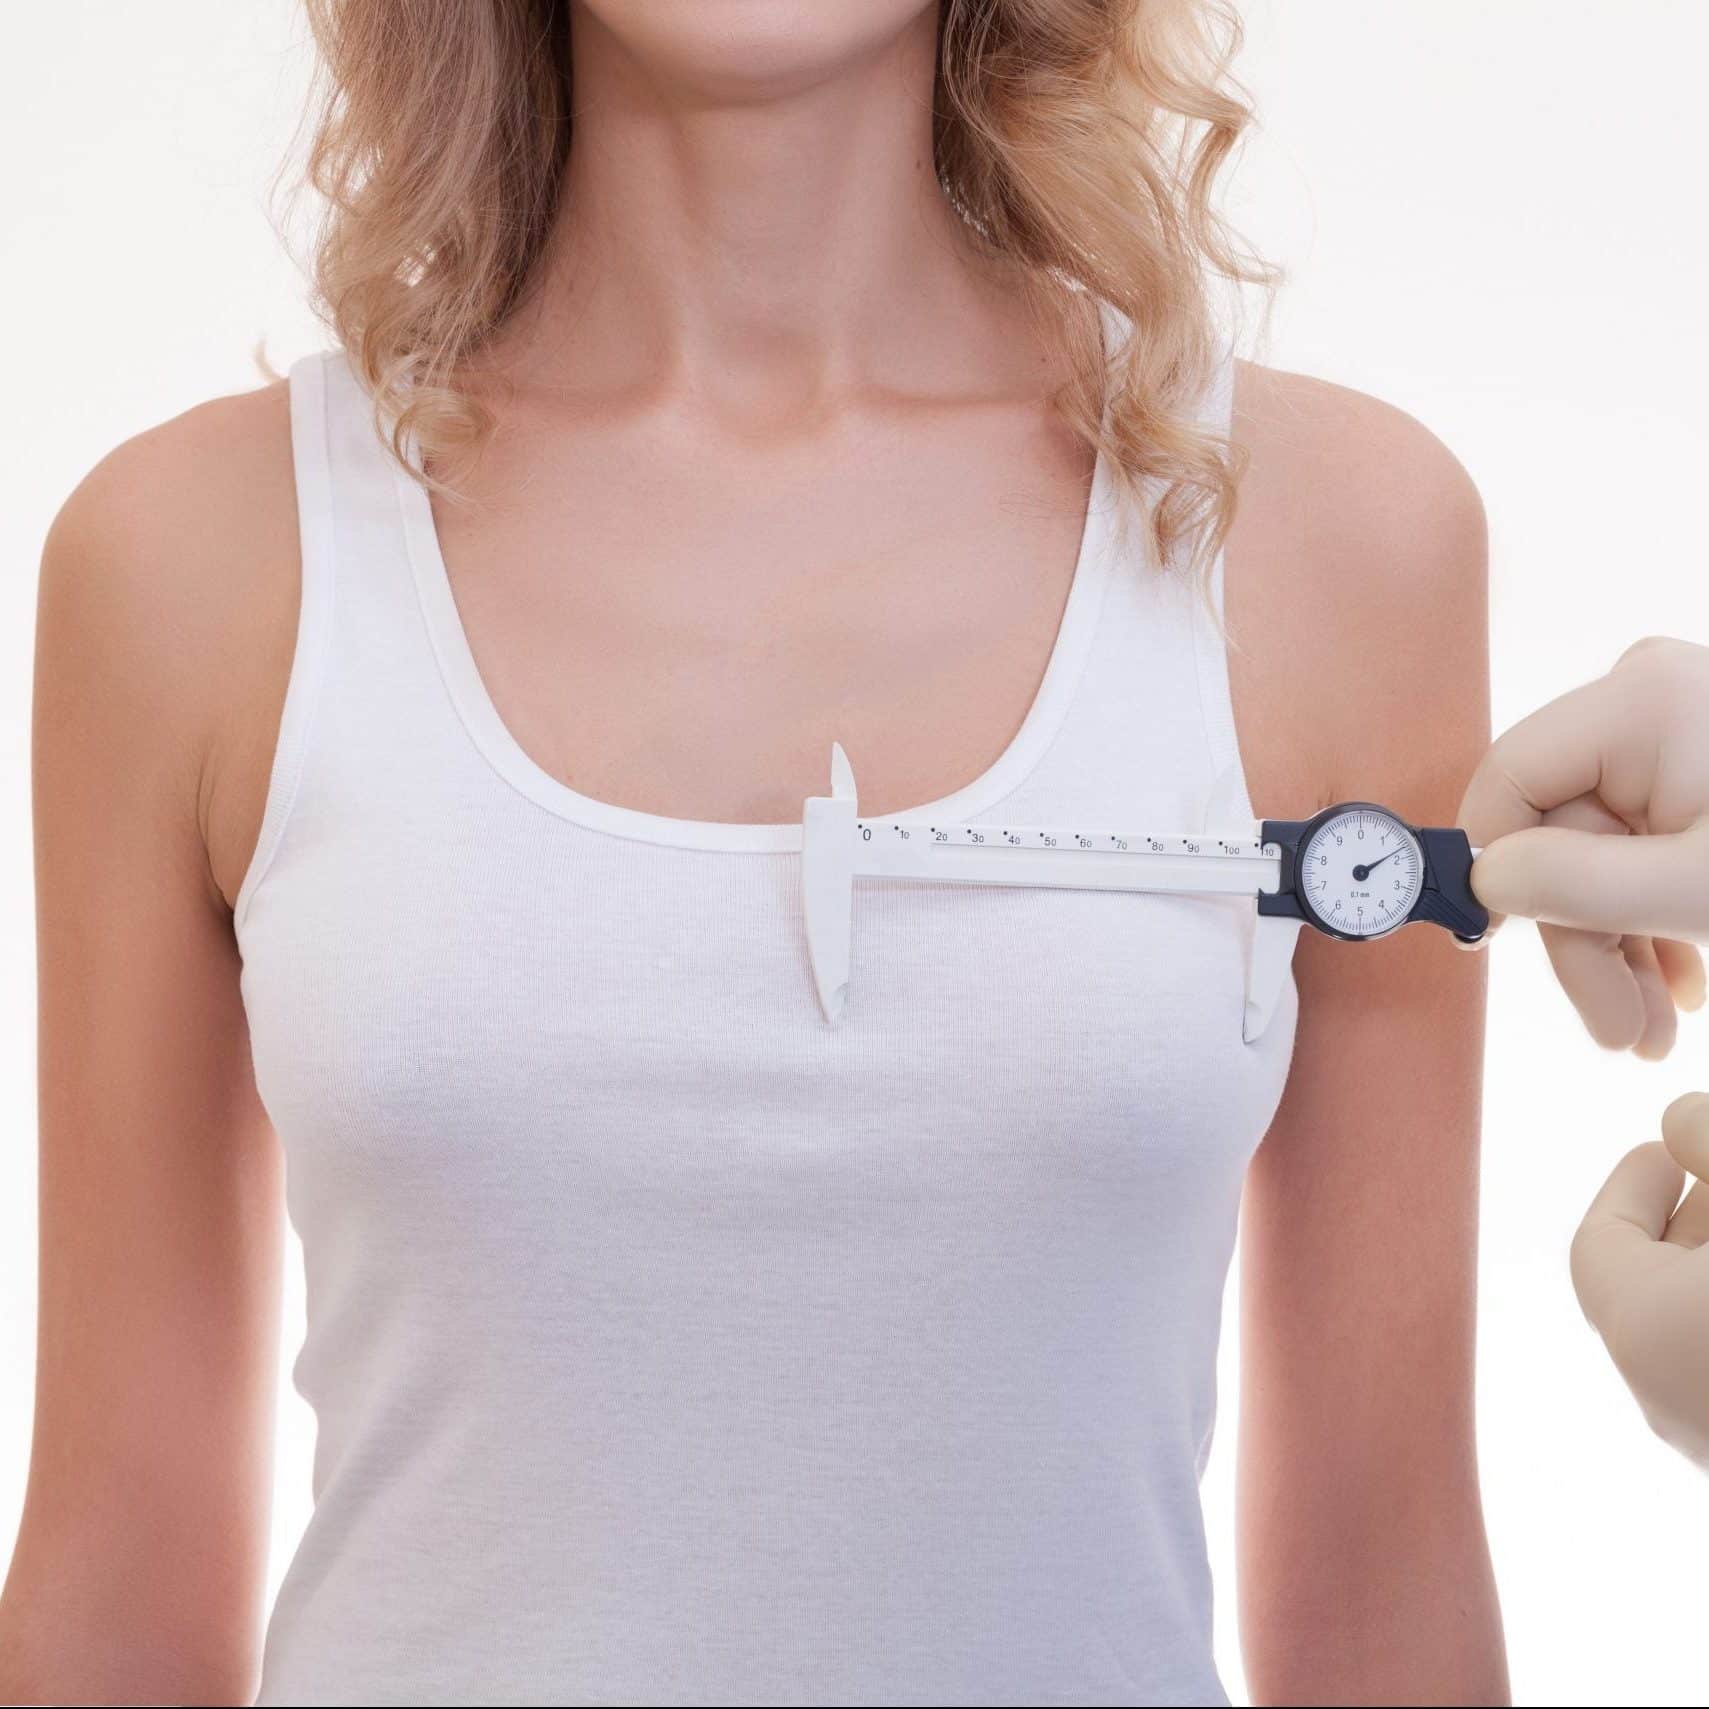 Breast implant options in New York